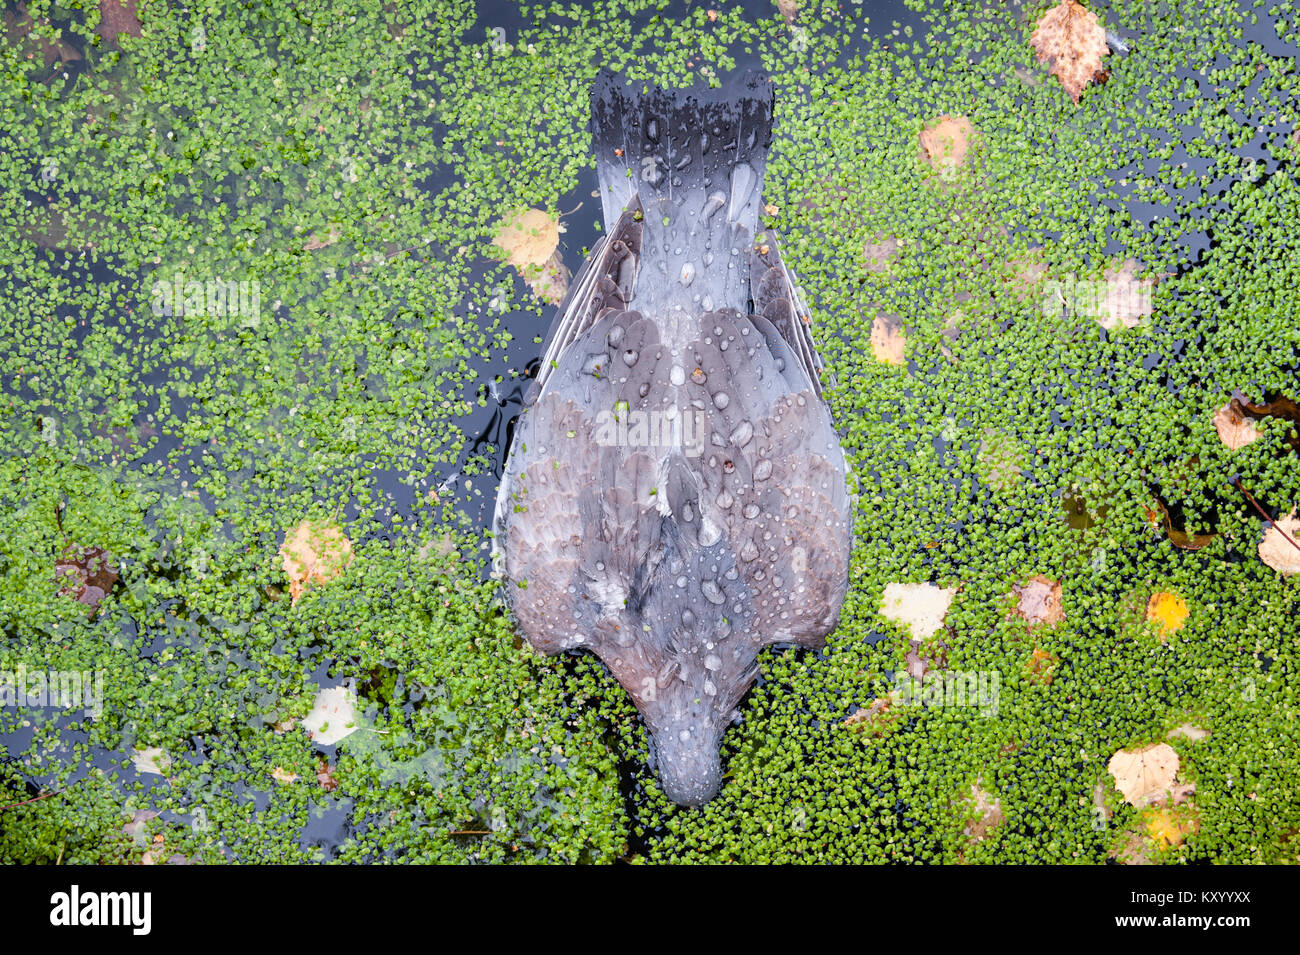 UK. A dead woodpigeon floats face down on the surface of a pond, among pondweed and fallen leaves Stock Photo